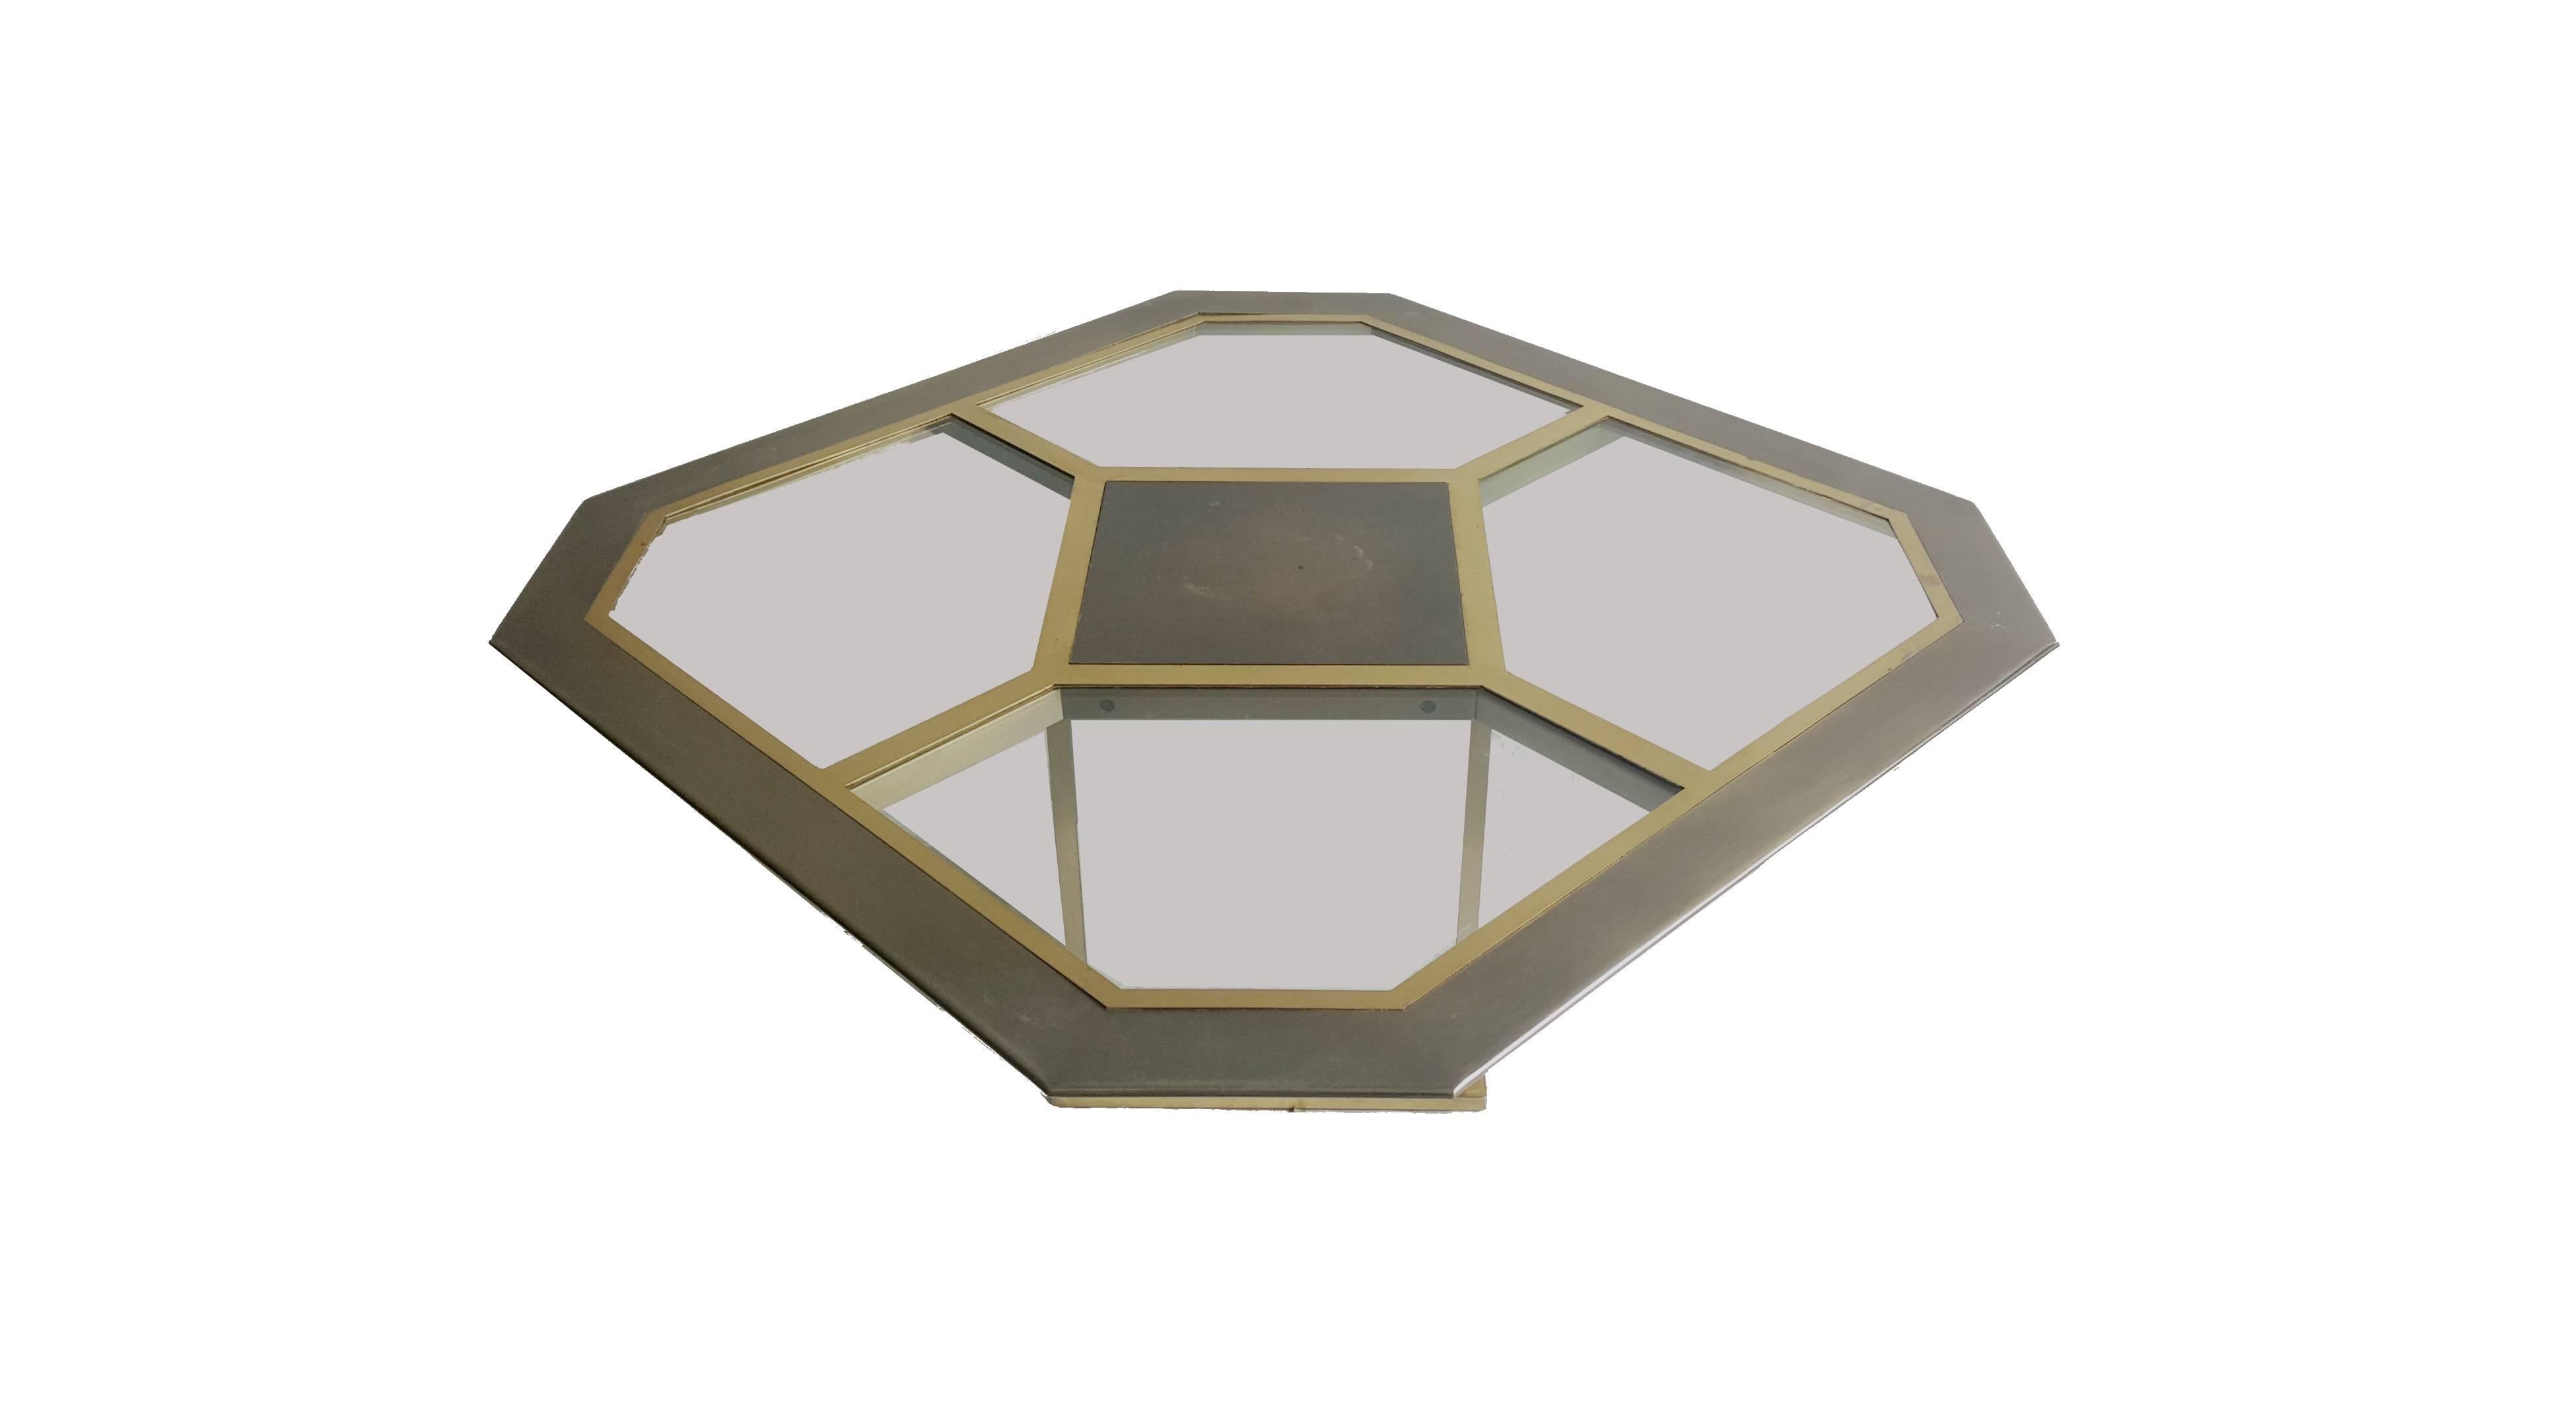 Octagonal brass coffee table with mirrored glass.

The base has mirrors on all four sides.

Good overall condition.

1970s, France

Measures: Height 45cm/18"
Width 90cm/35".